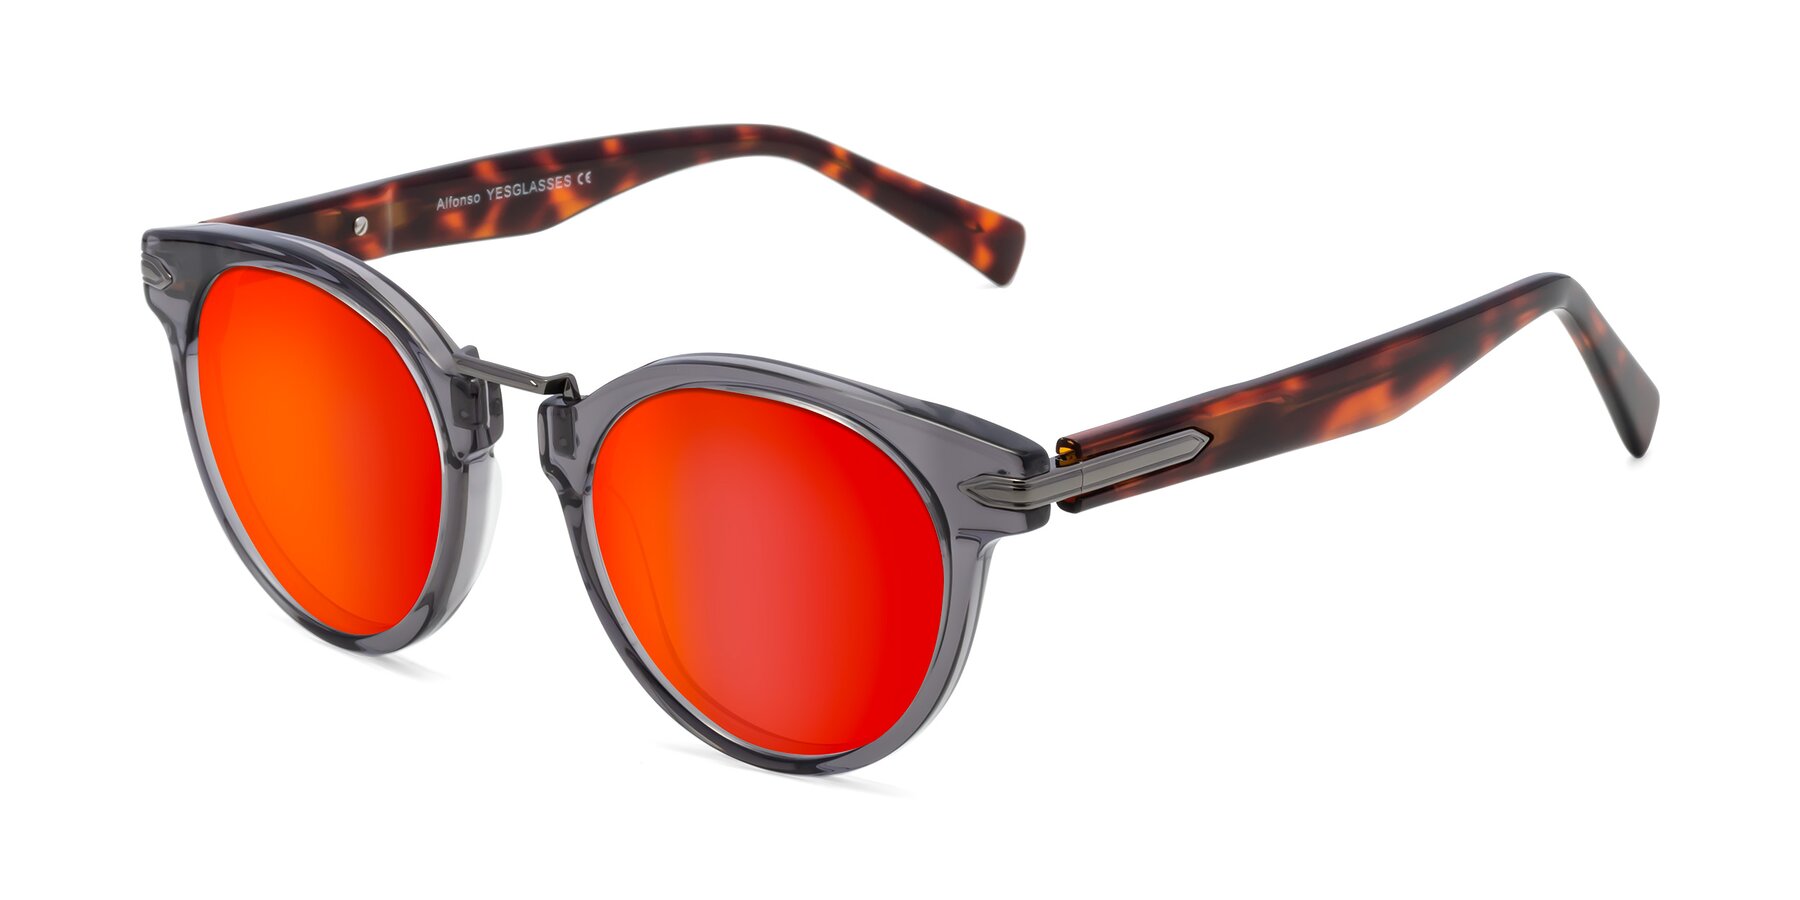 Angle of Alfonso in Gray /Tortoise with Red Gold Mirrored Lenses